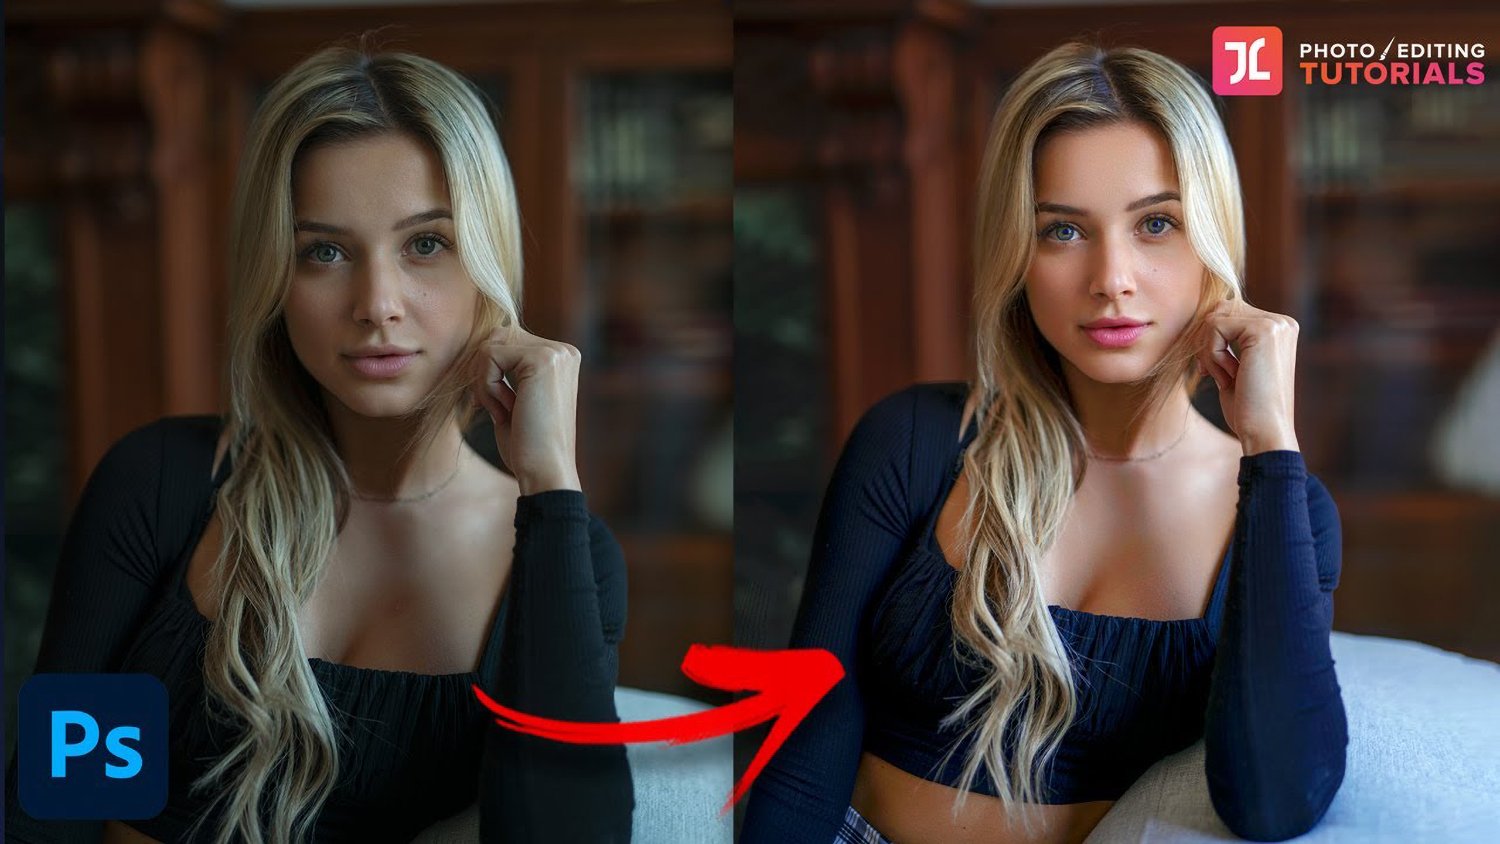 Try This Simple Photoshop Trick to Make Colors Pop